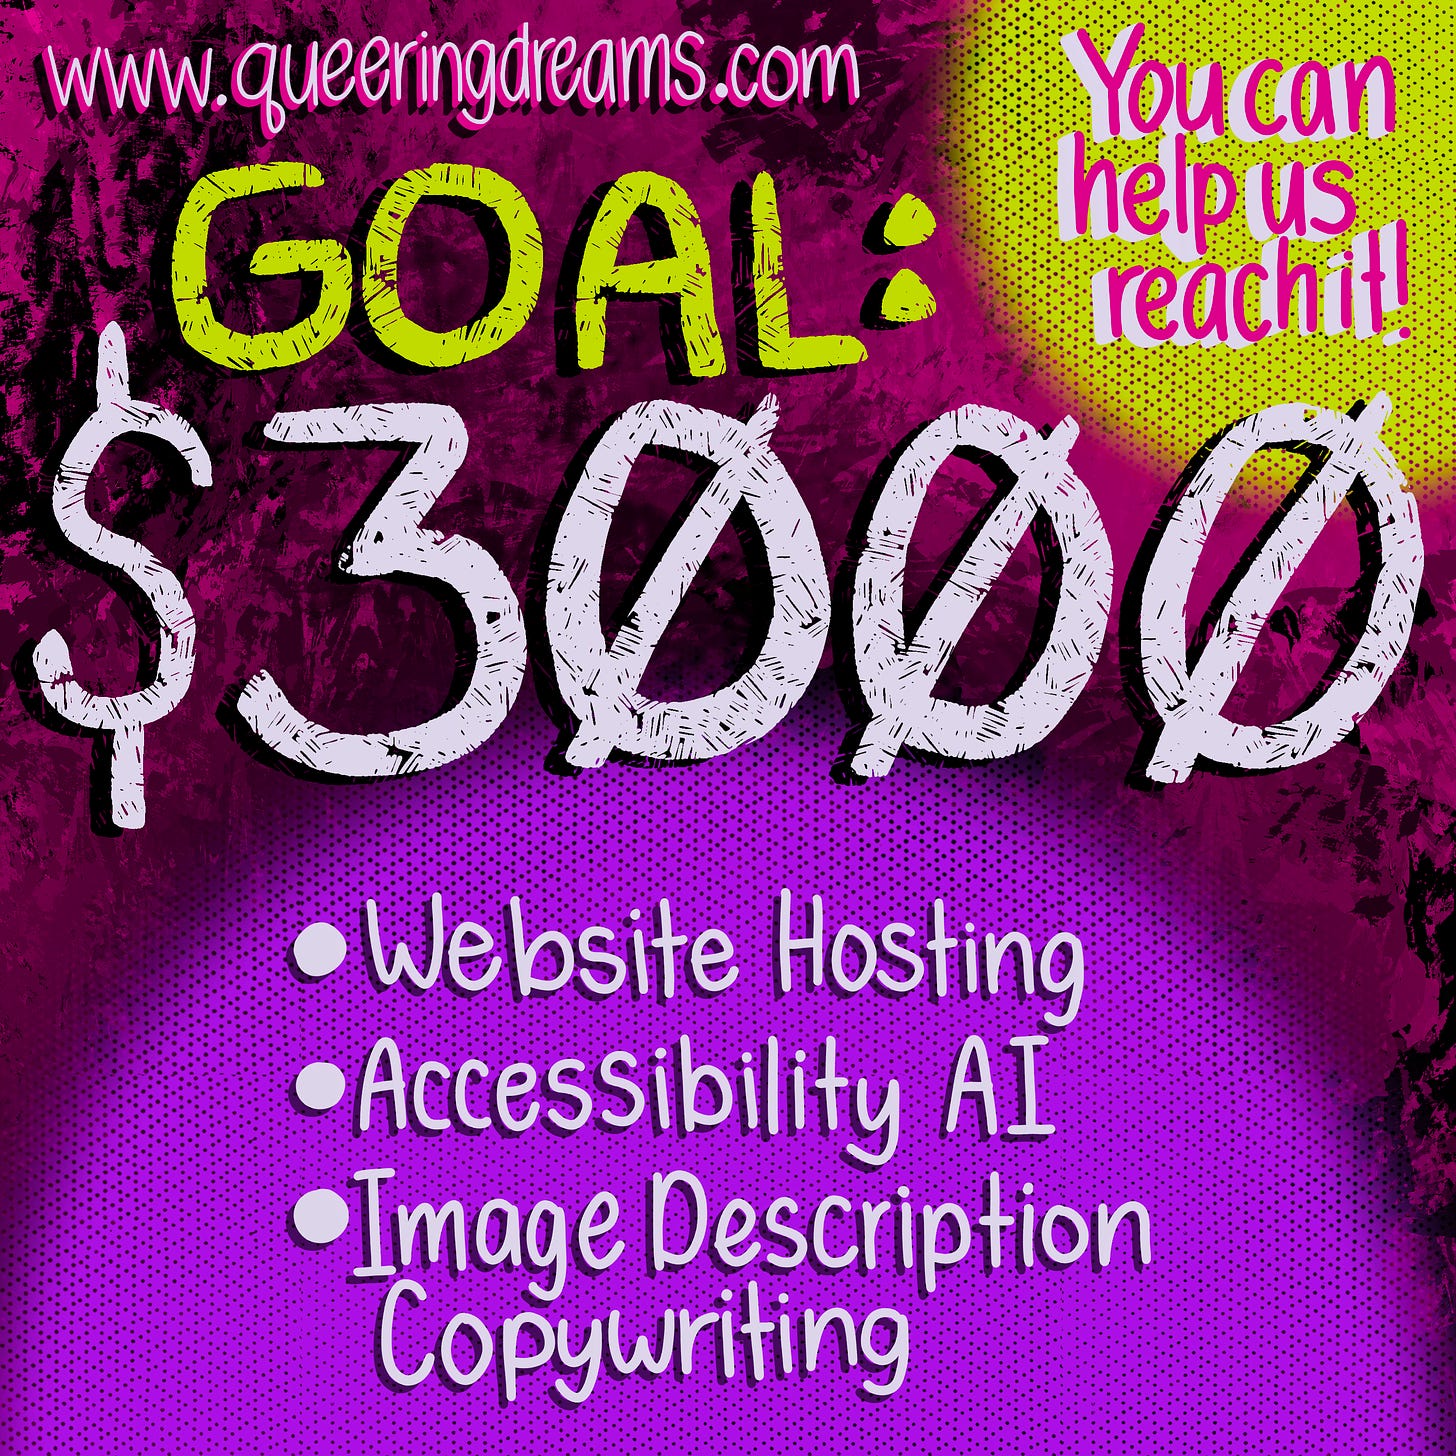 “Goal: $3000. You can help us reach it. Supports website hosting, accessibility AI, image description copywriting,” in hand lettering against purple & yellow dots. www.queeringdreams.com. All set against a pink with black splotchy paint background.